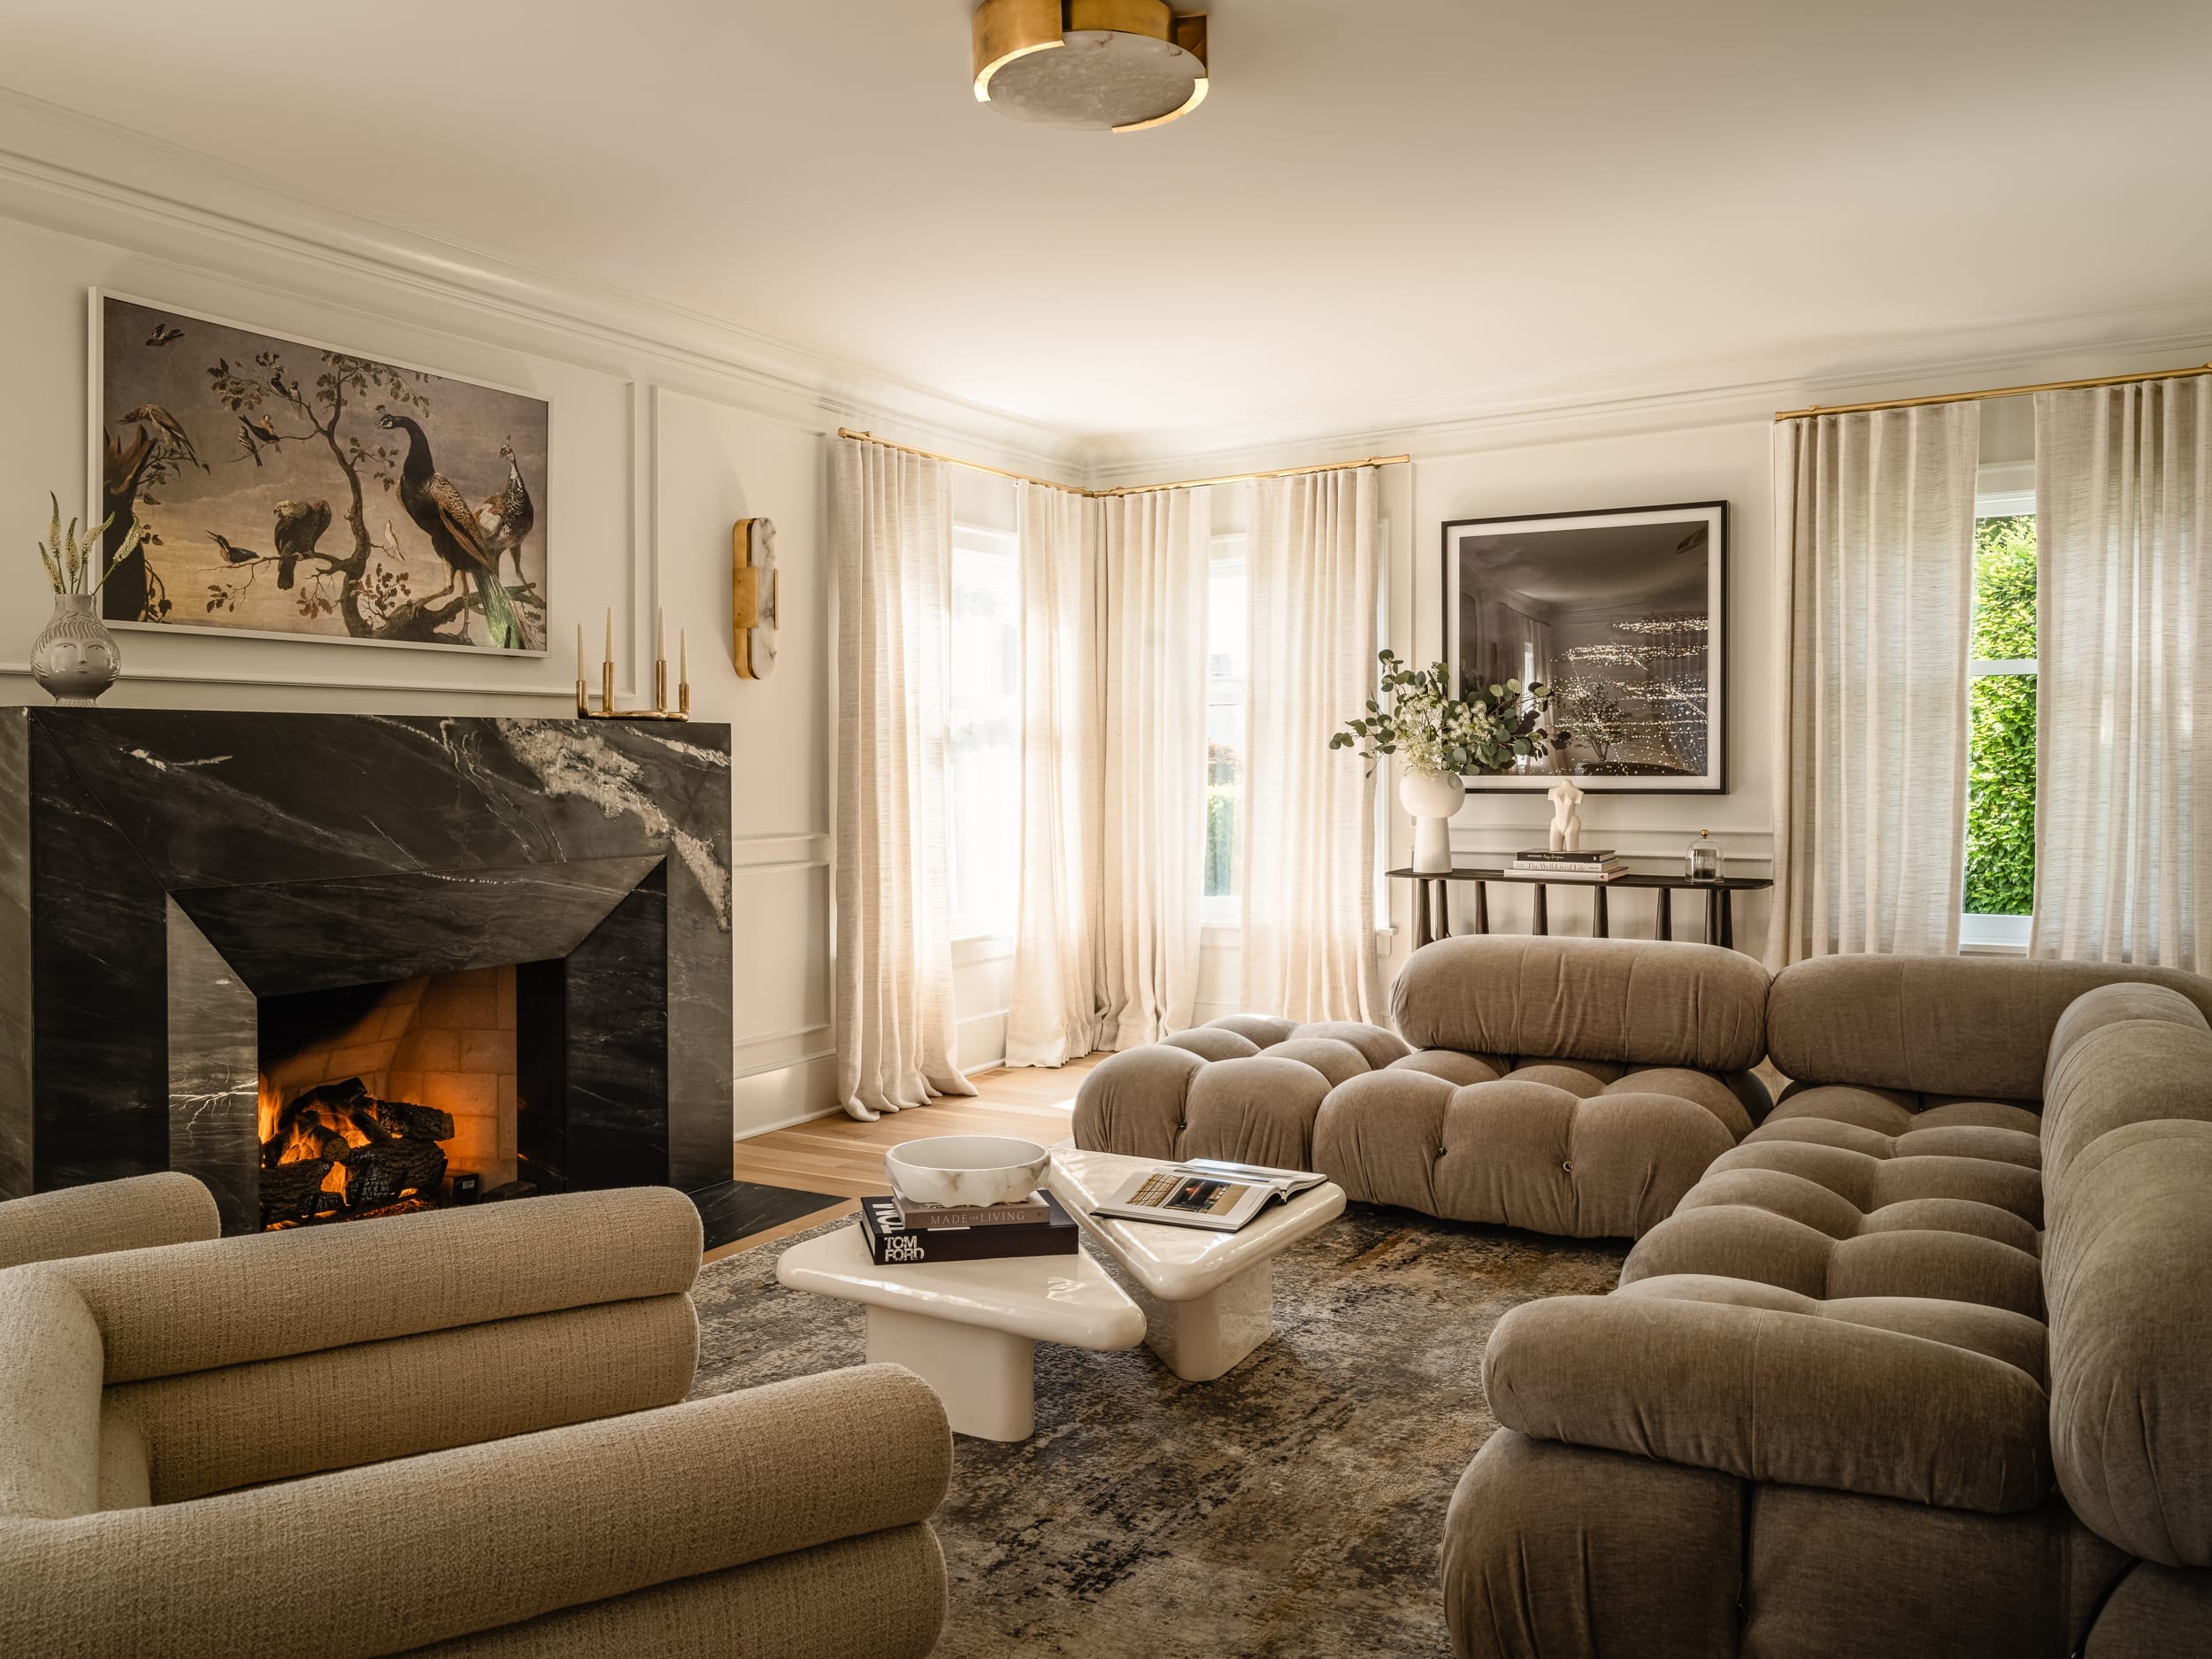 A living room with couches and a fireplace.